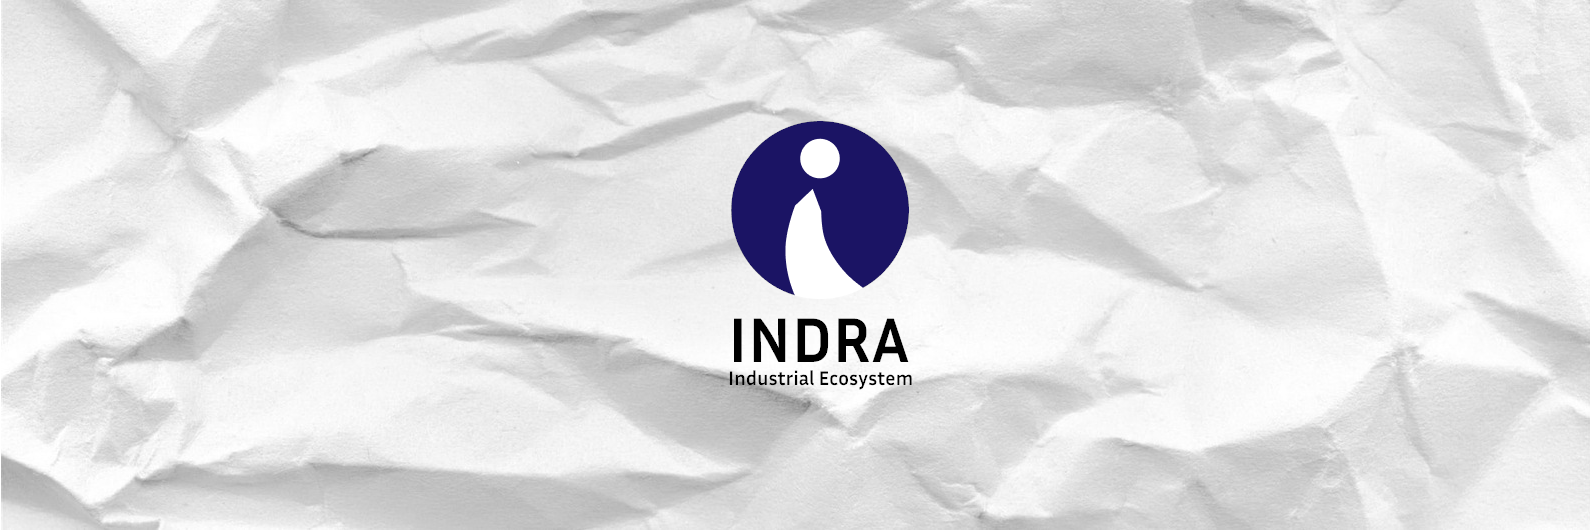 INDRA Industrial Ecosystem